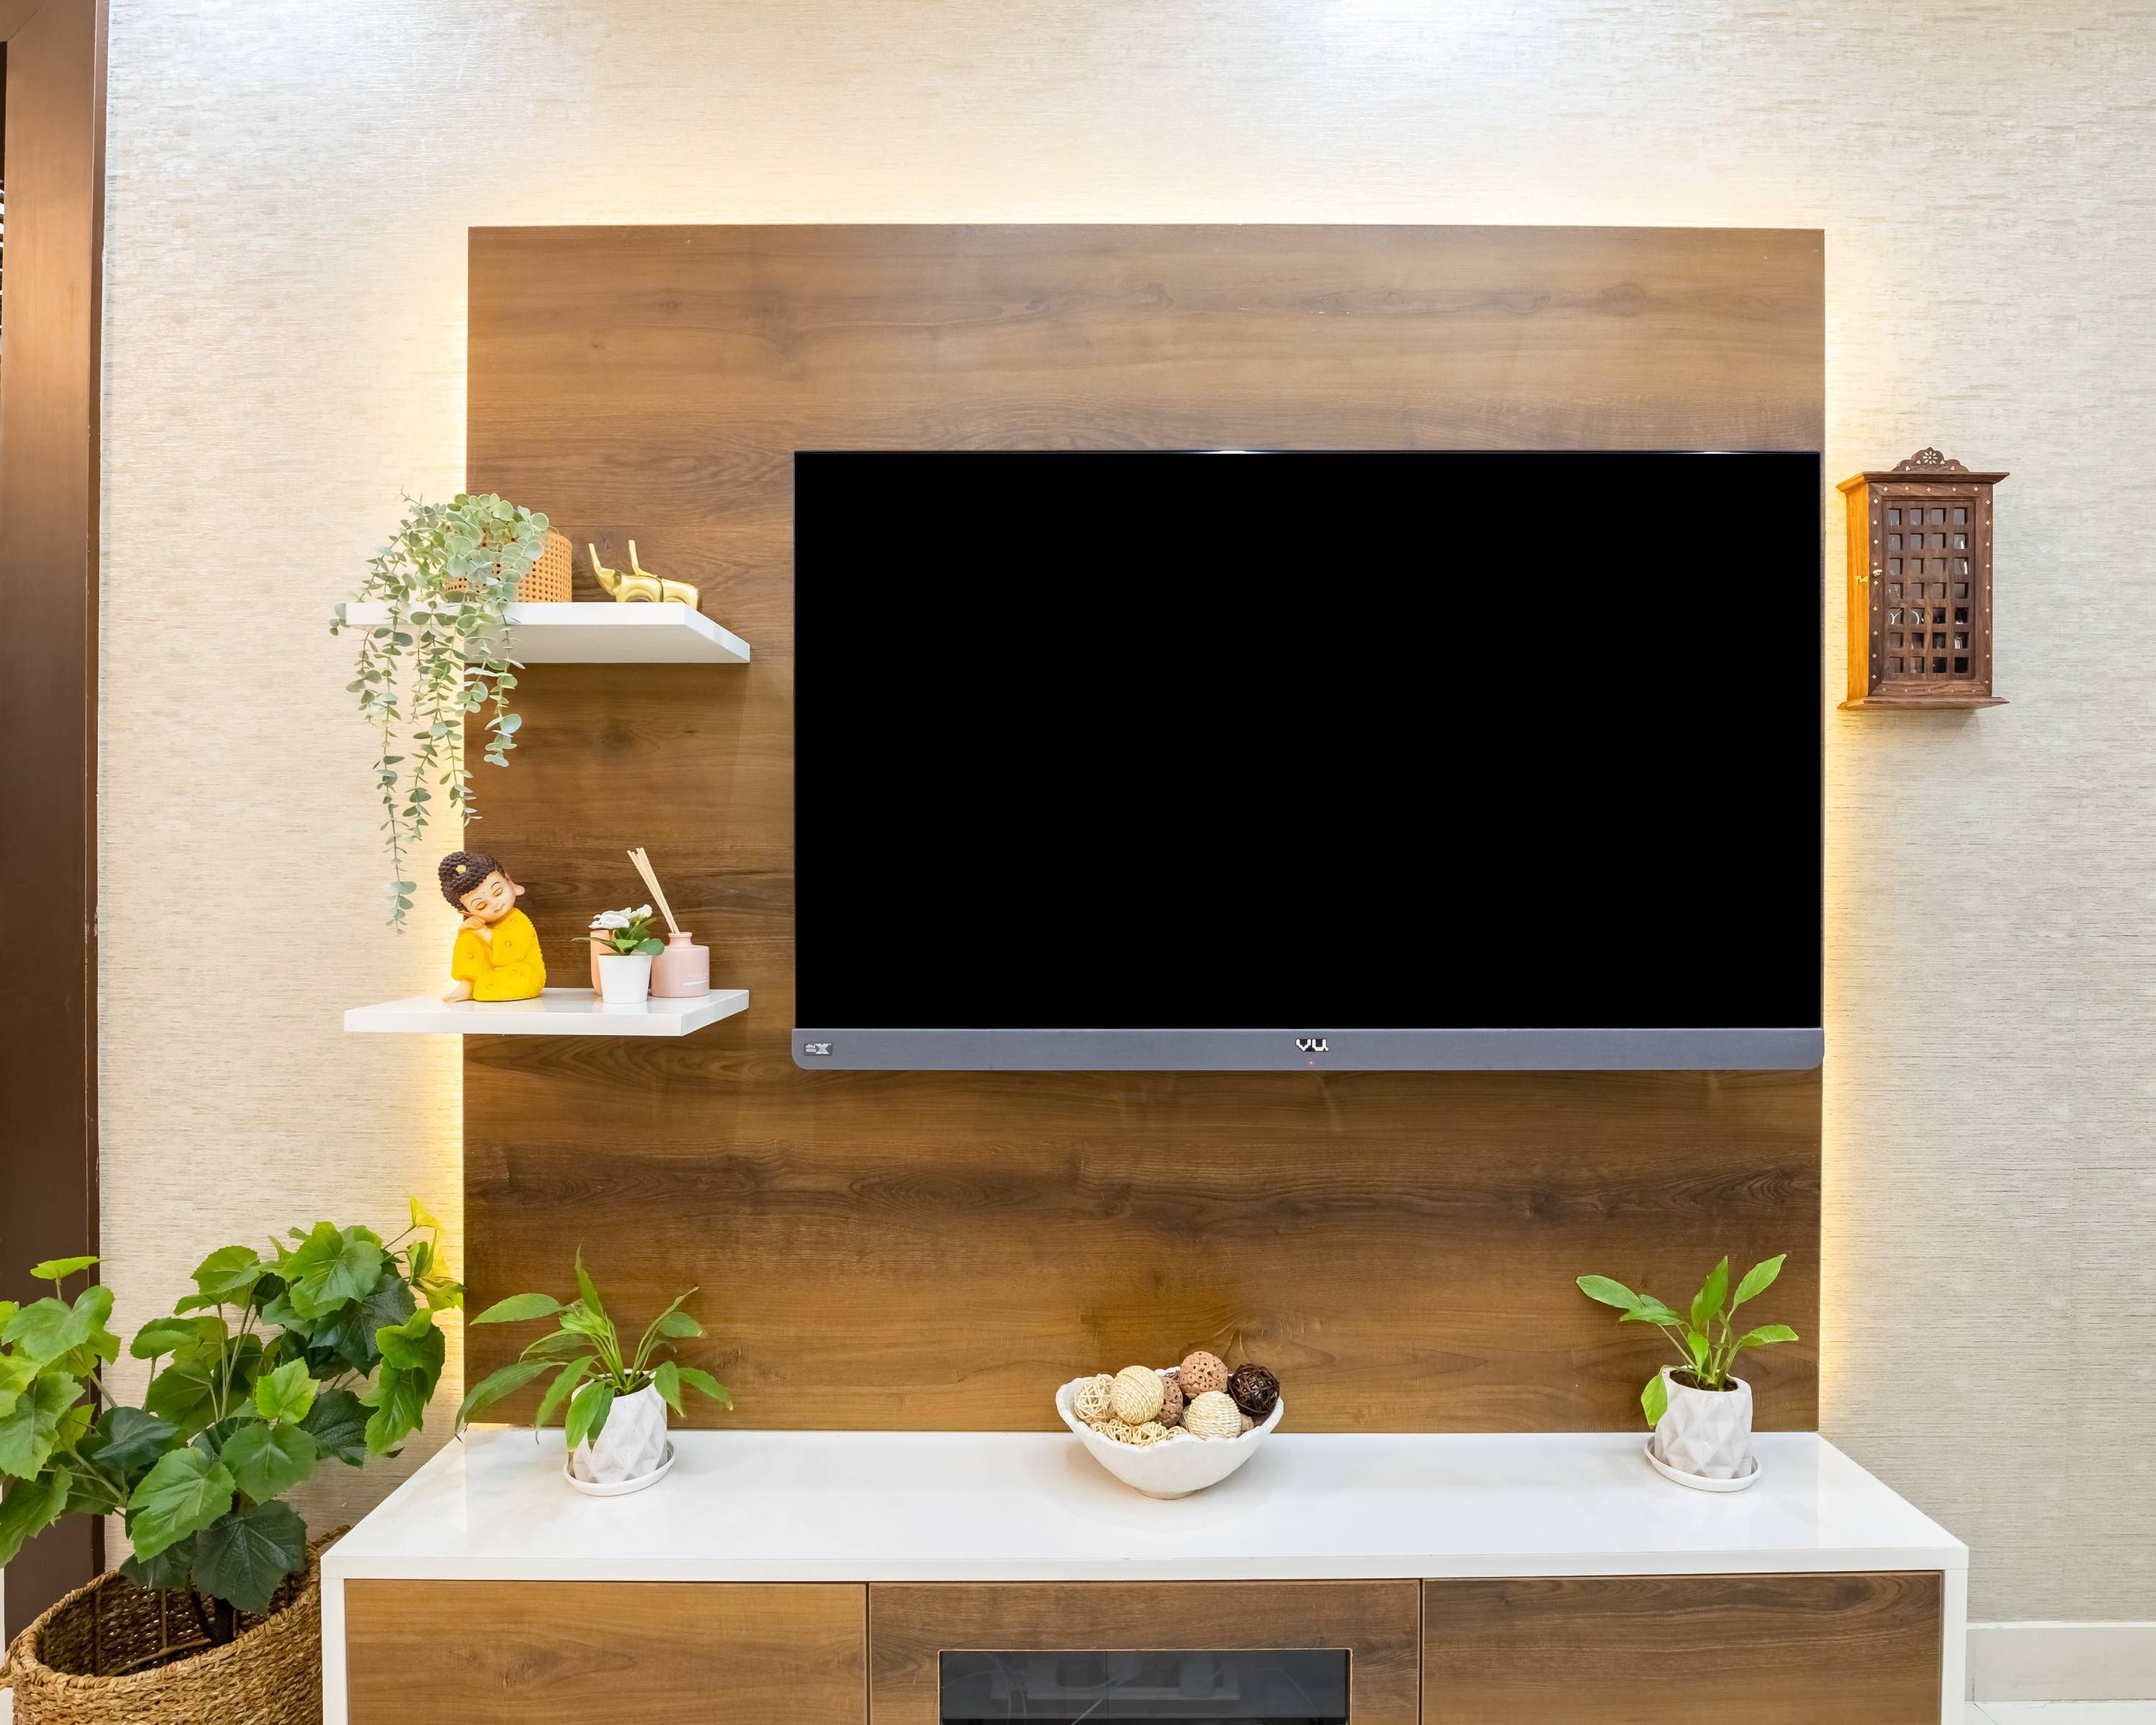 Modern TV Cabinet With Wooden Storage Units